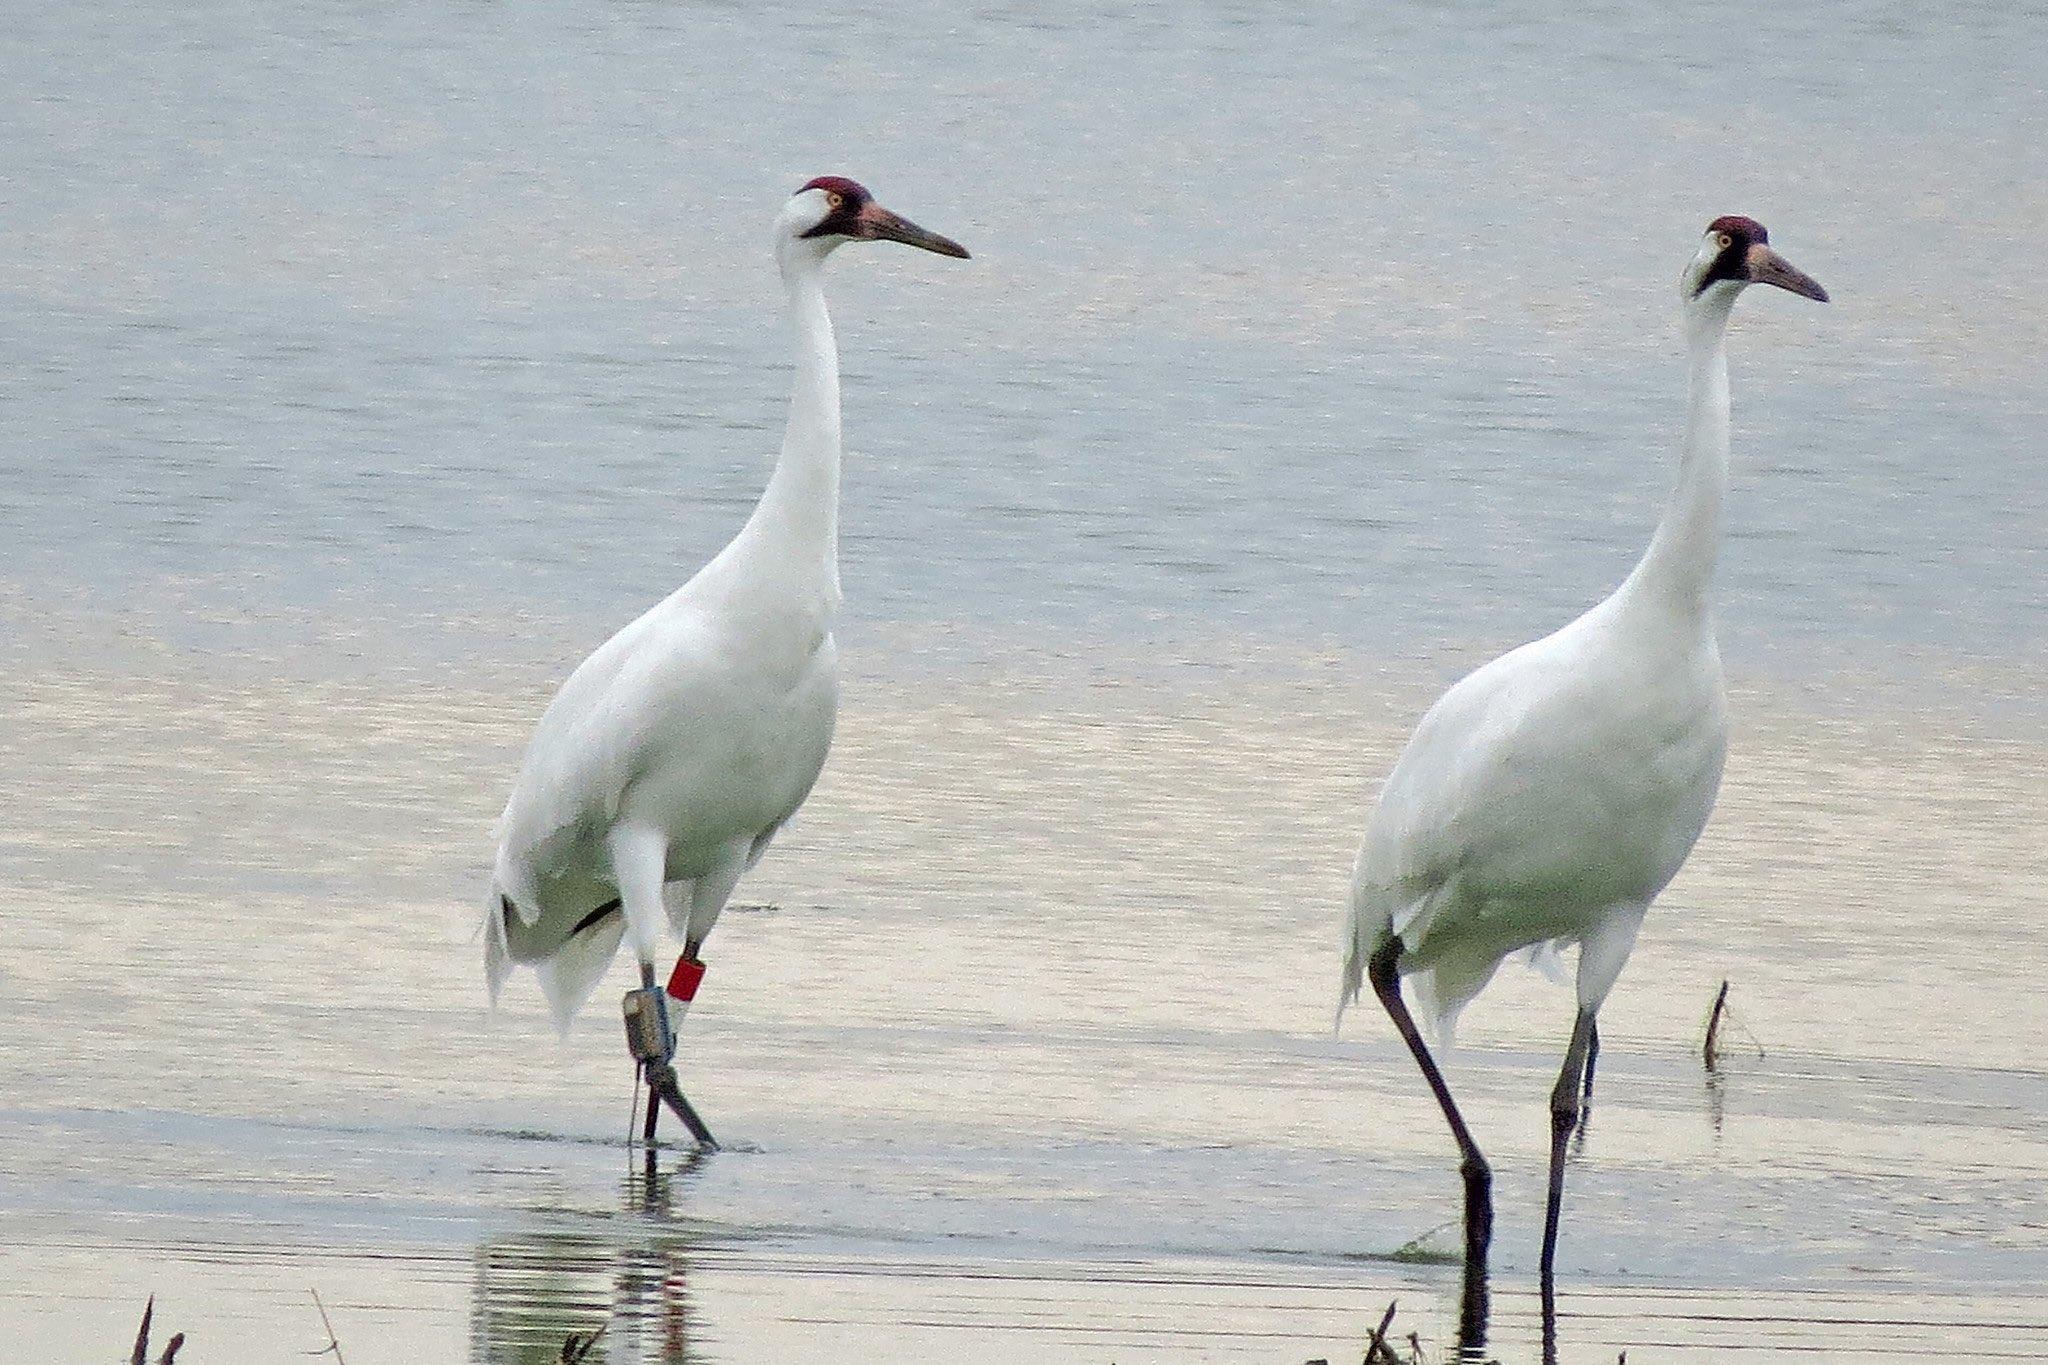 Whooping cranes are known for their snowy white plumage, red caps and bugling call. Seen here in South Dakota. (U.S. Fish and Wildlife Service Mountain-Pacific Region / Flickr Creative Commons)